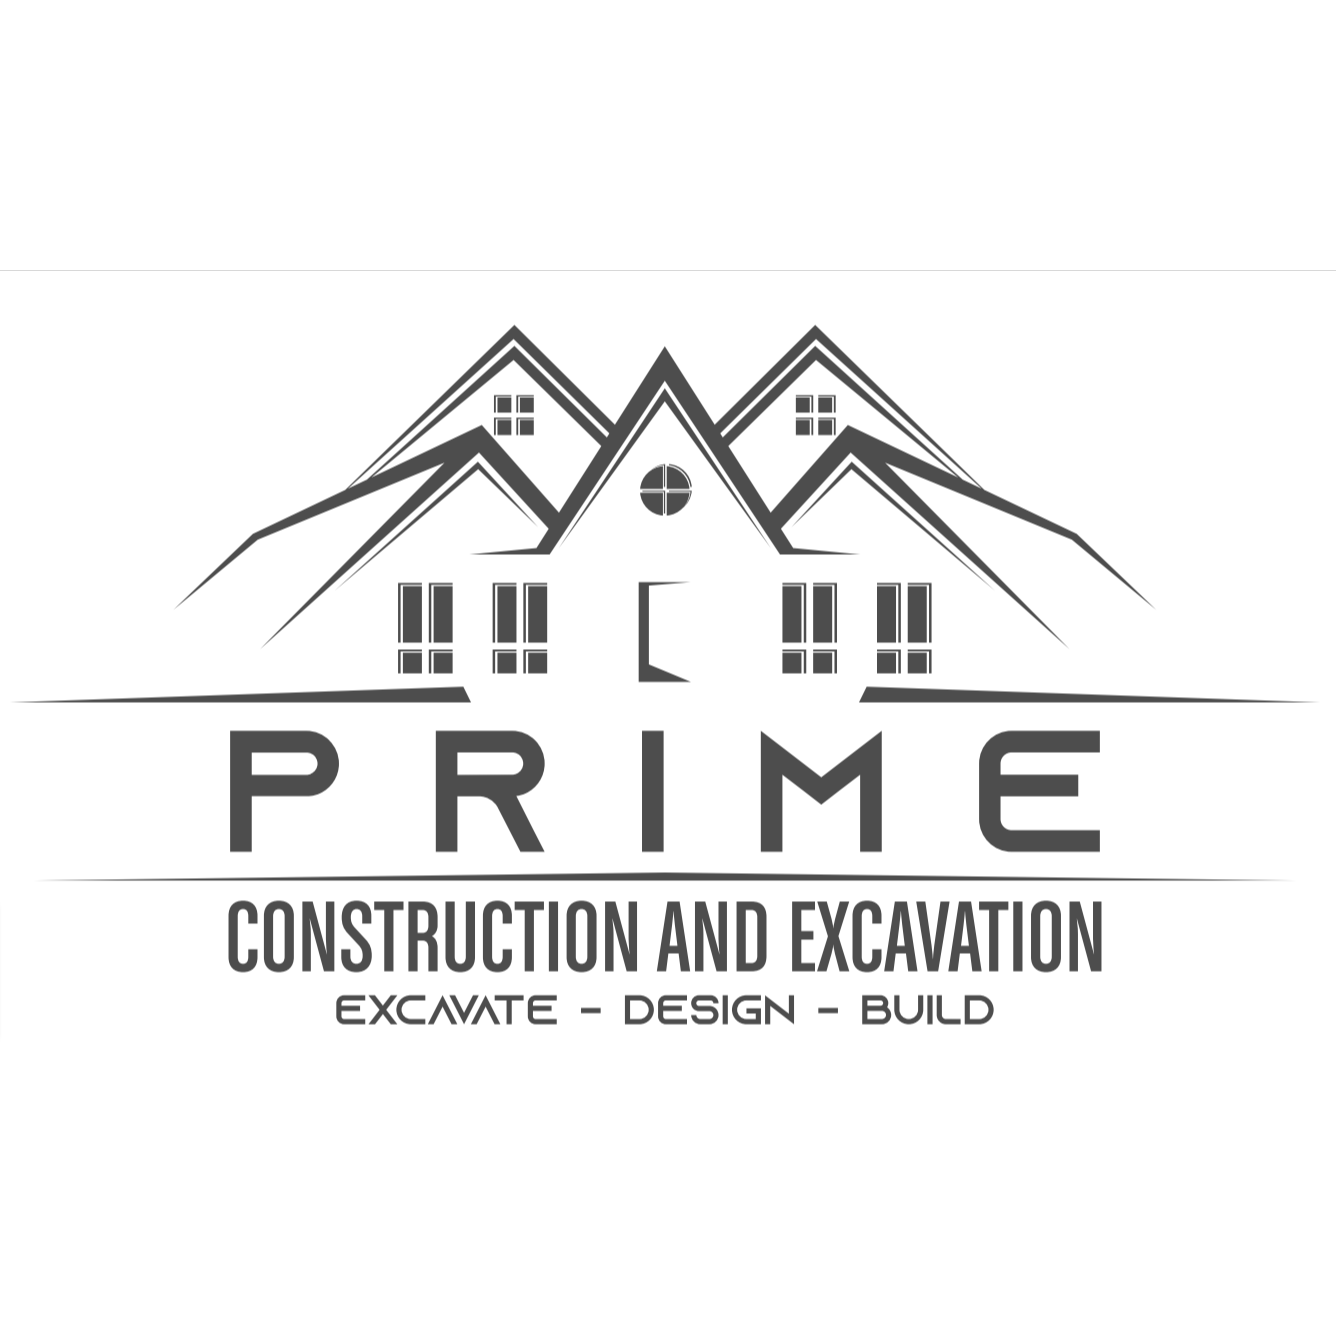 Prime Construction and Excavation - West Chester, PA - (484)209-2770 | ShowMeLocal.com